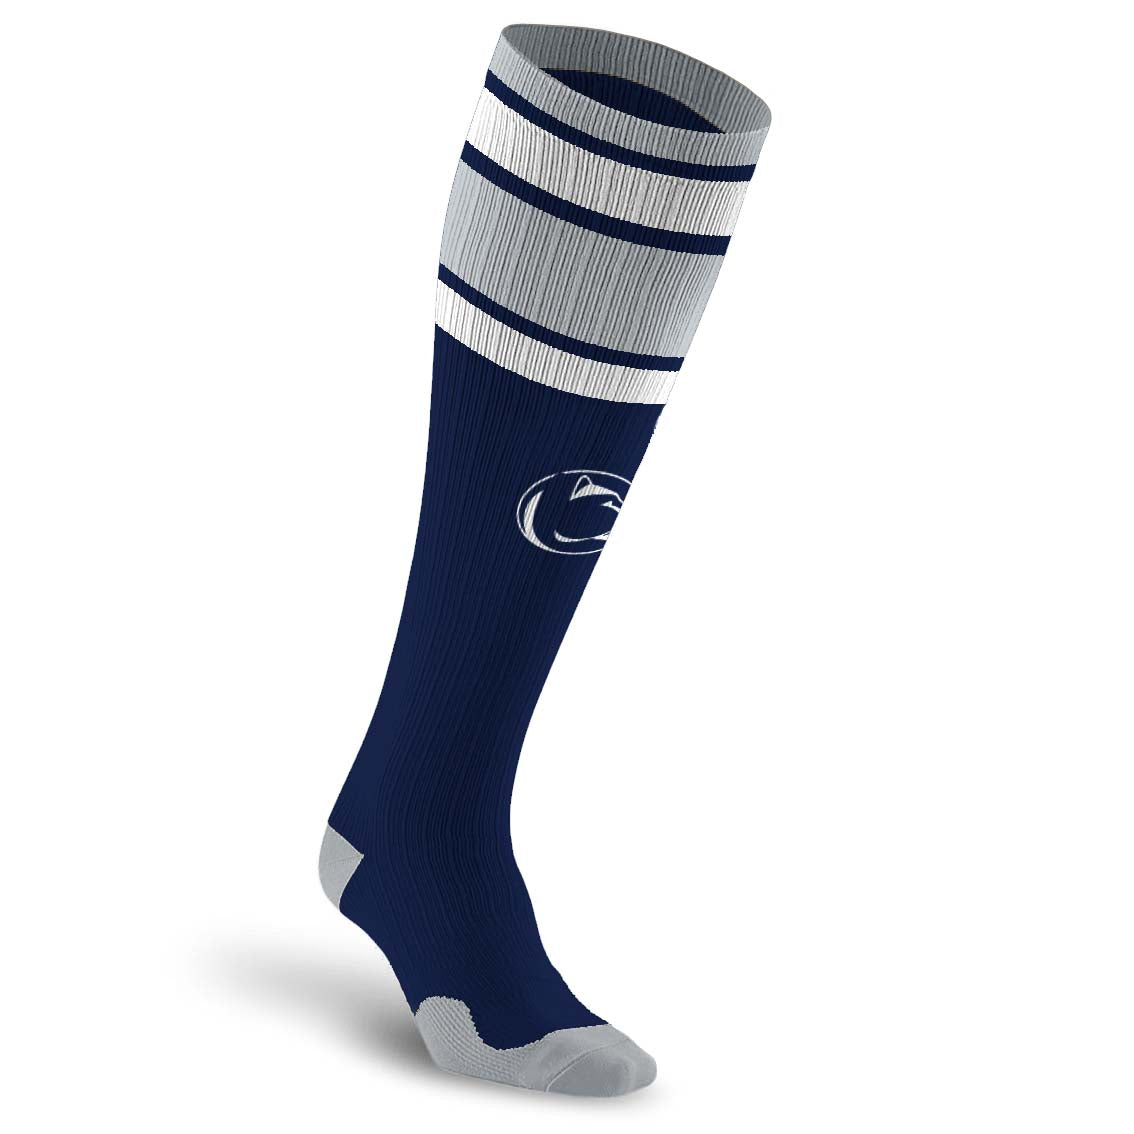 College Compression Socks, Penn State Nittany Lions